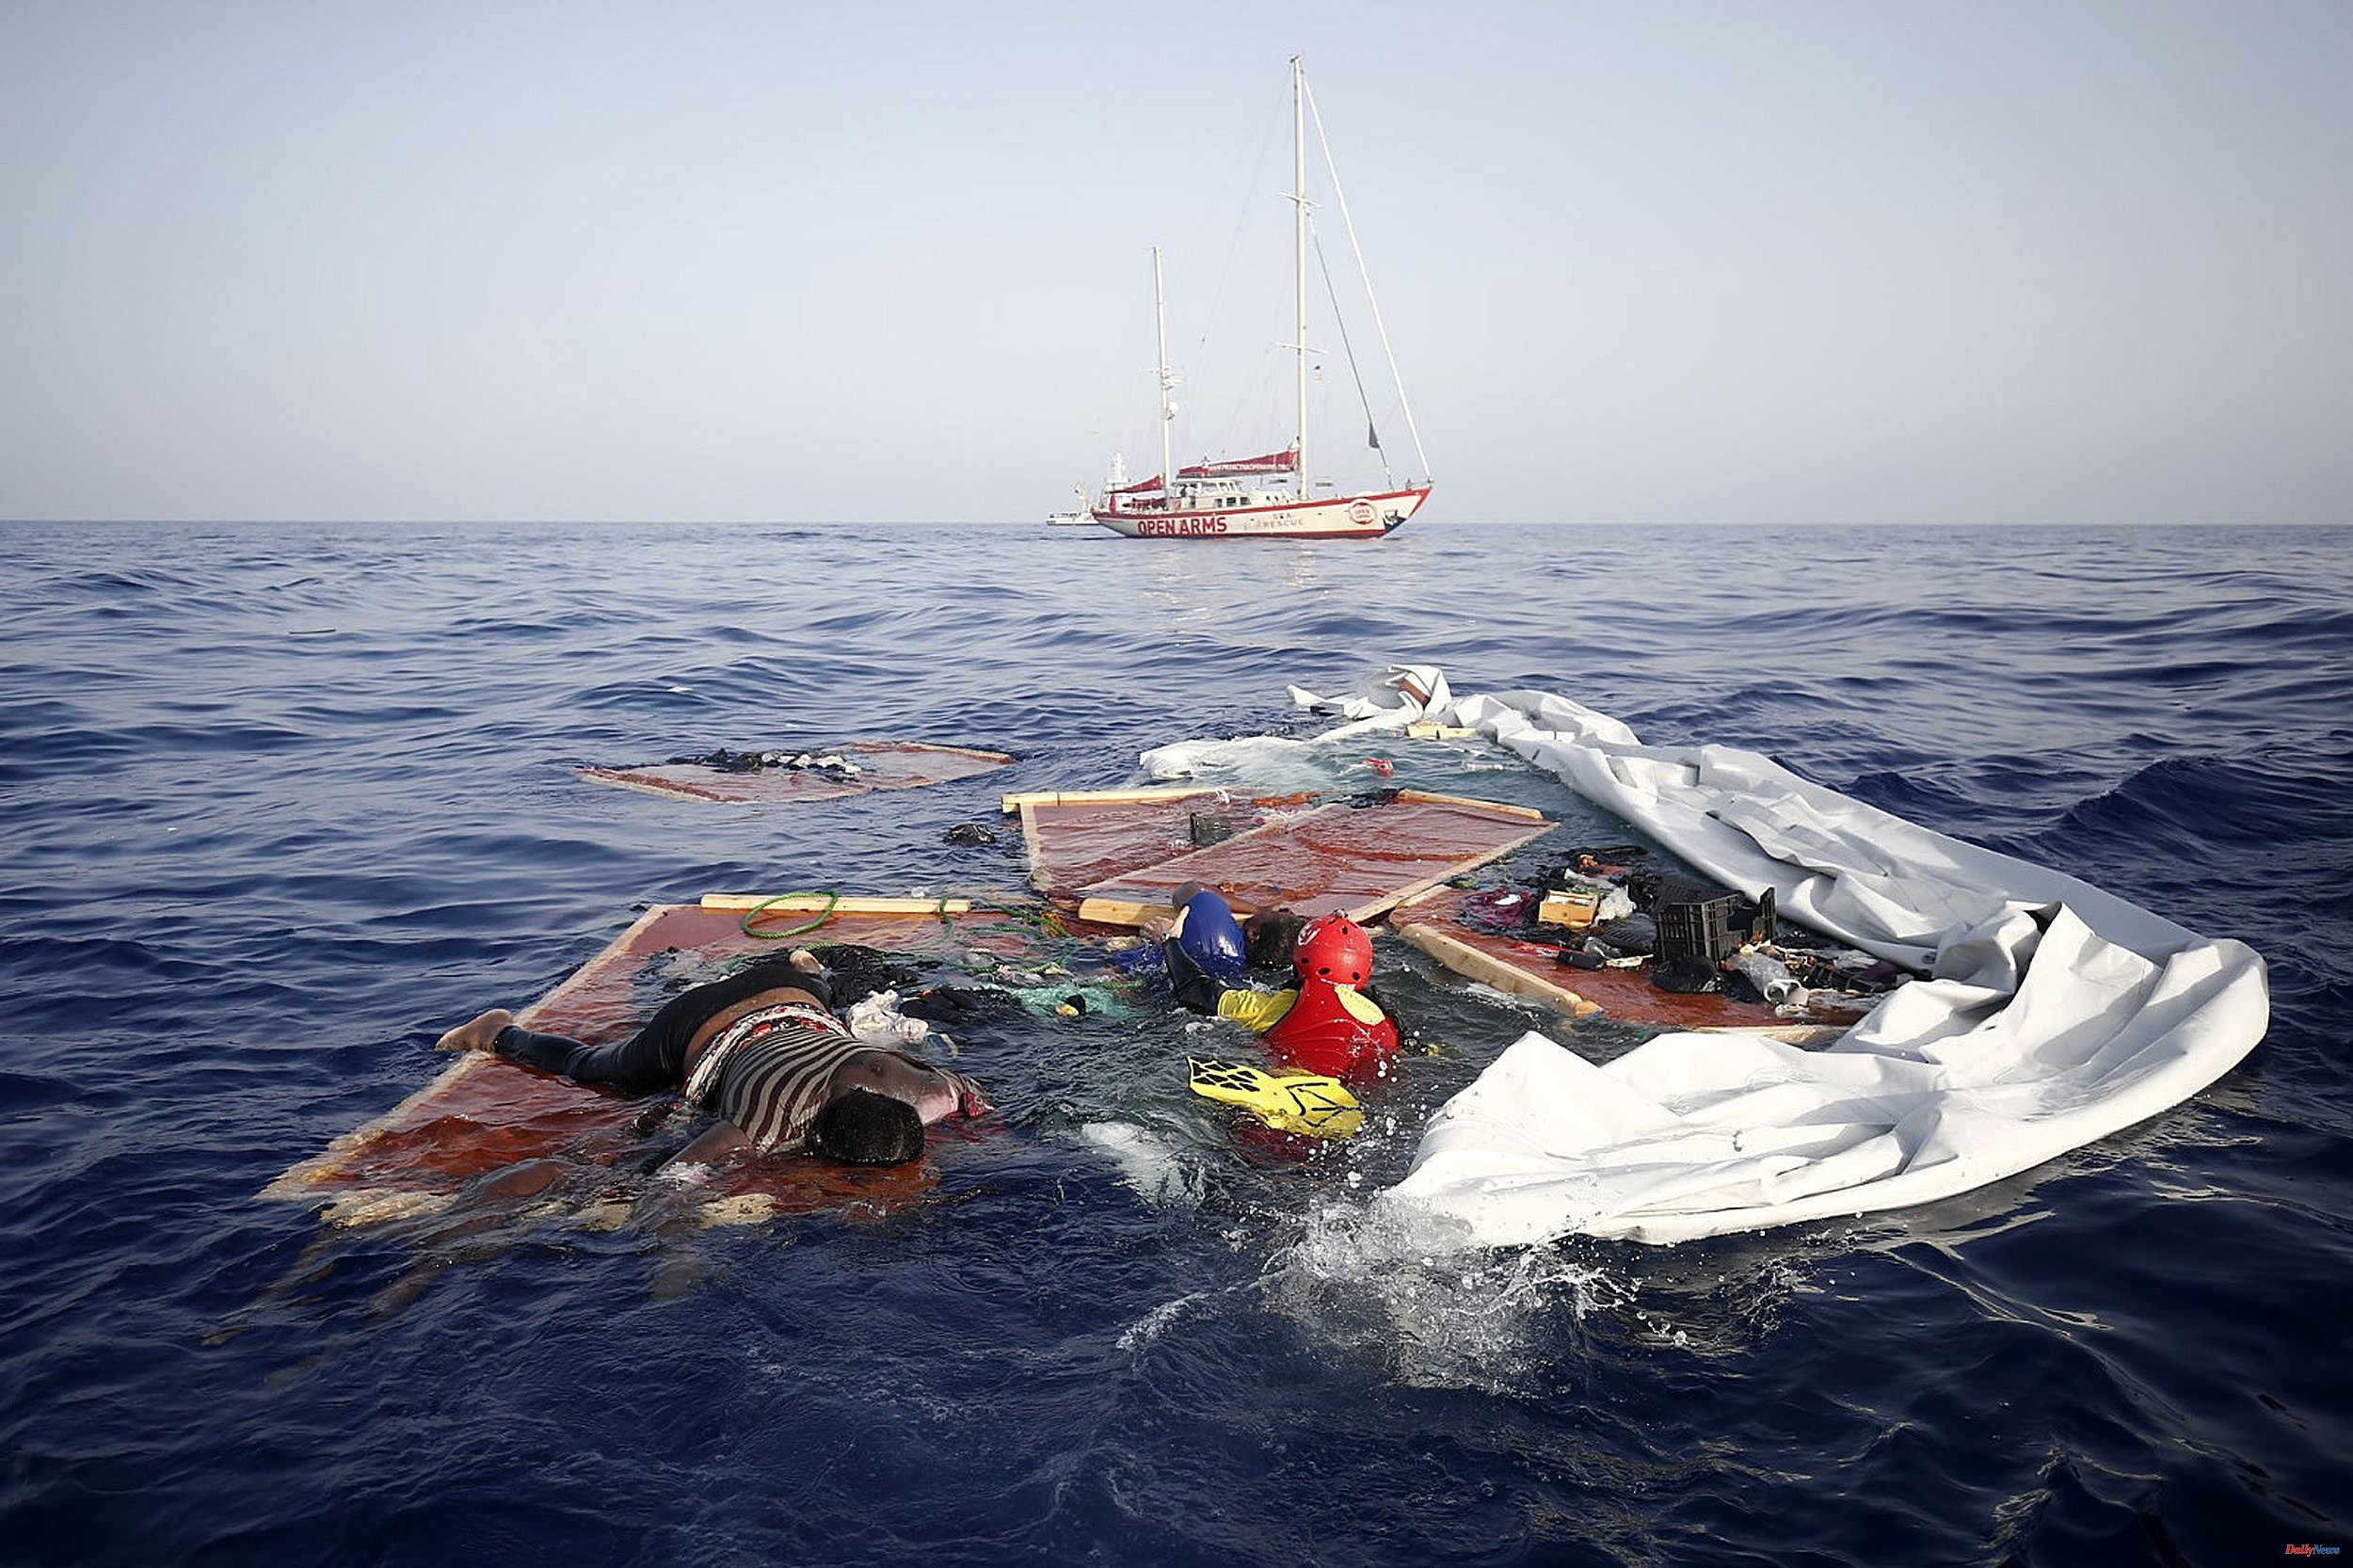 Immigration At least 11 migrants dead and 60 missing in a shipwreck off the coast of Libya